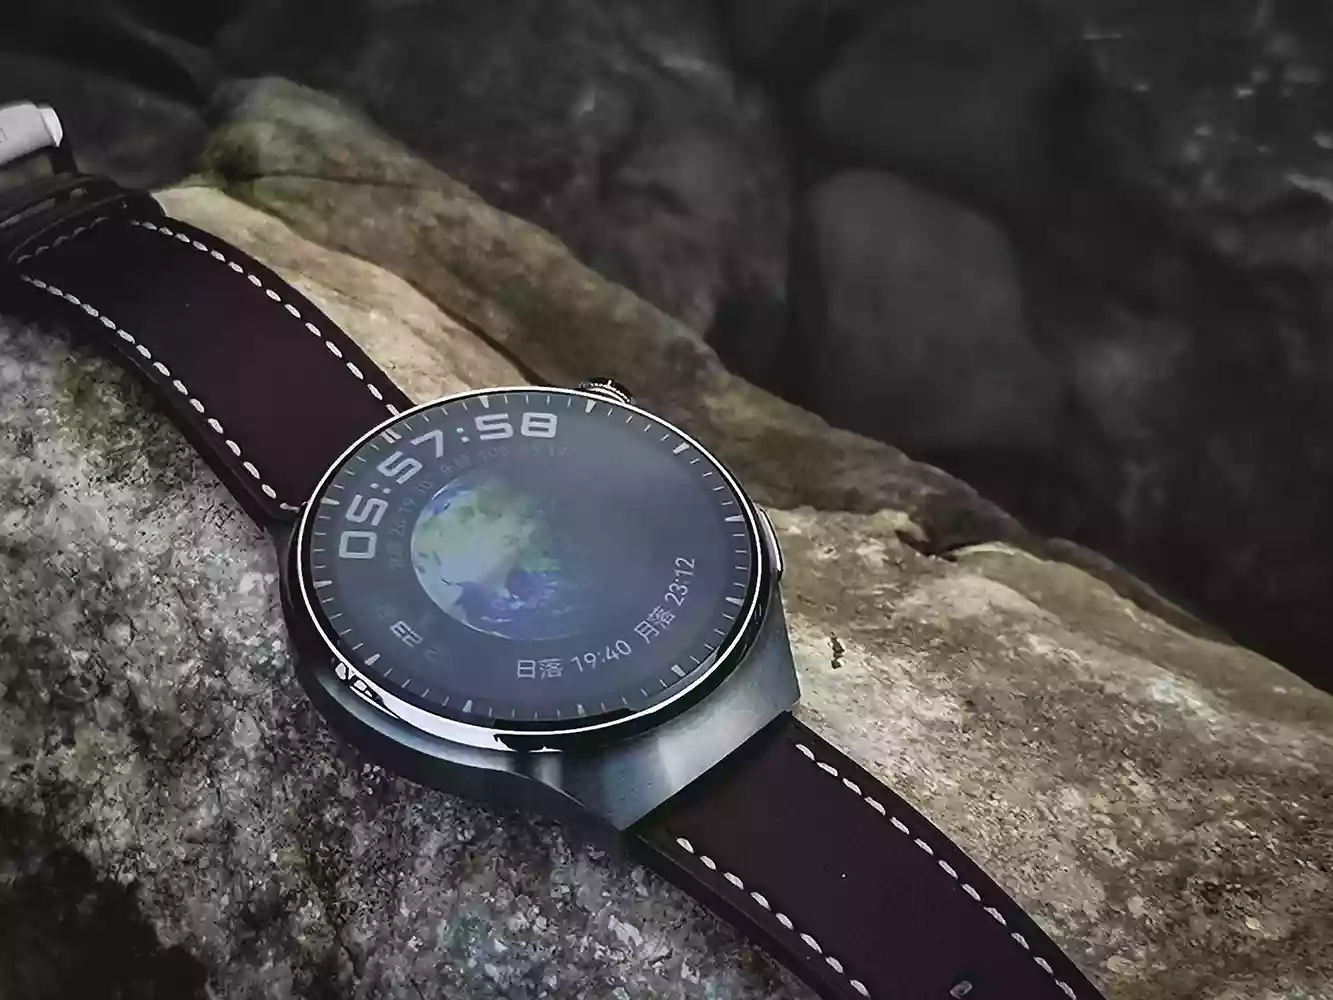 Huawei Watch 4 Pro Leather Version image tour - Huawei Central